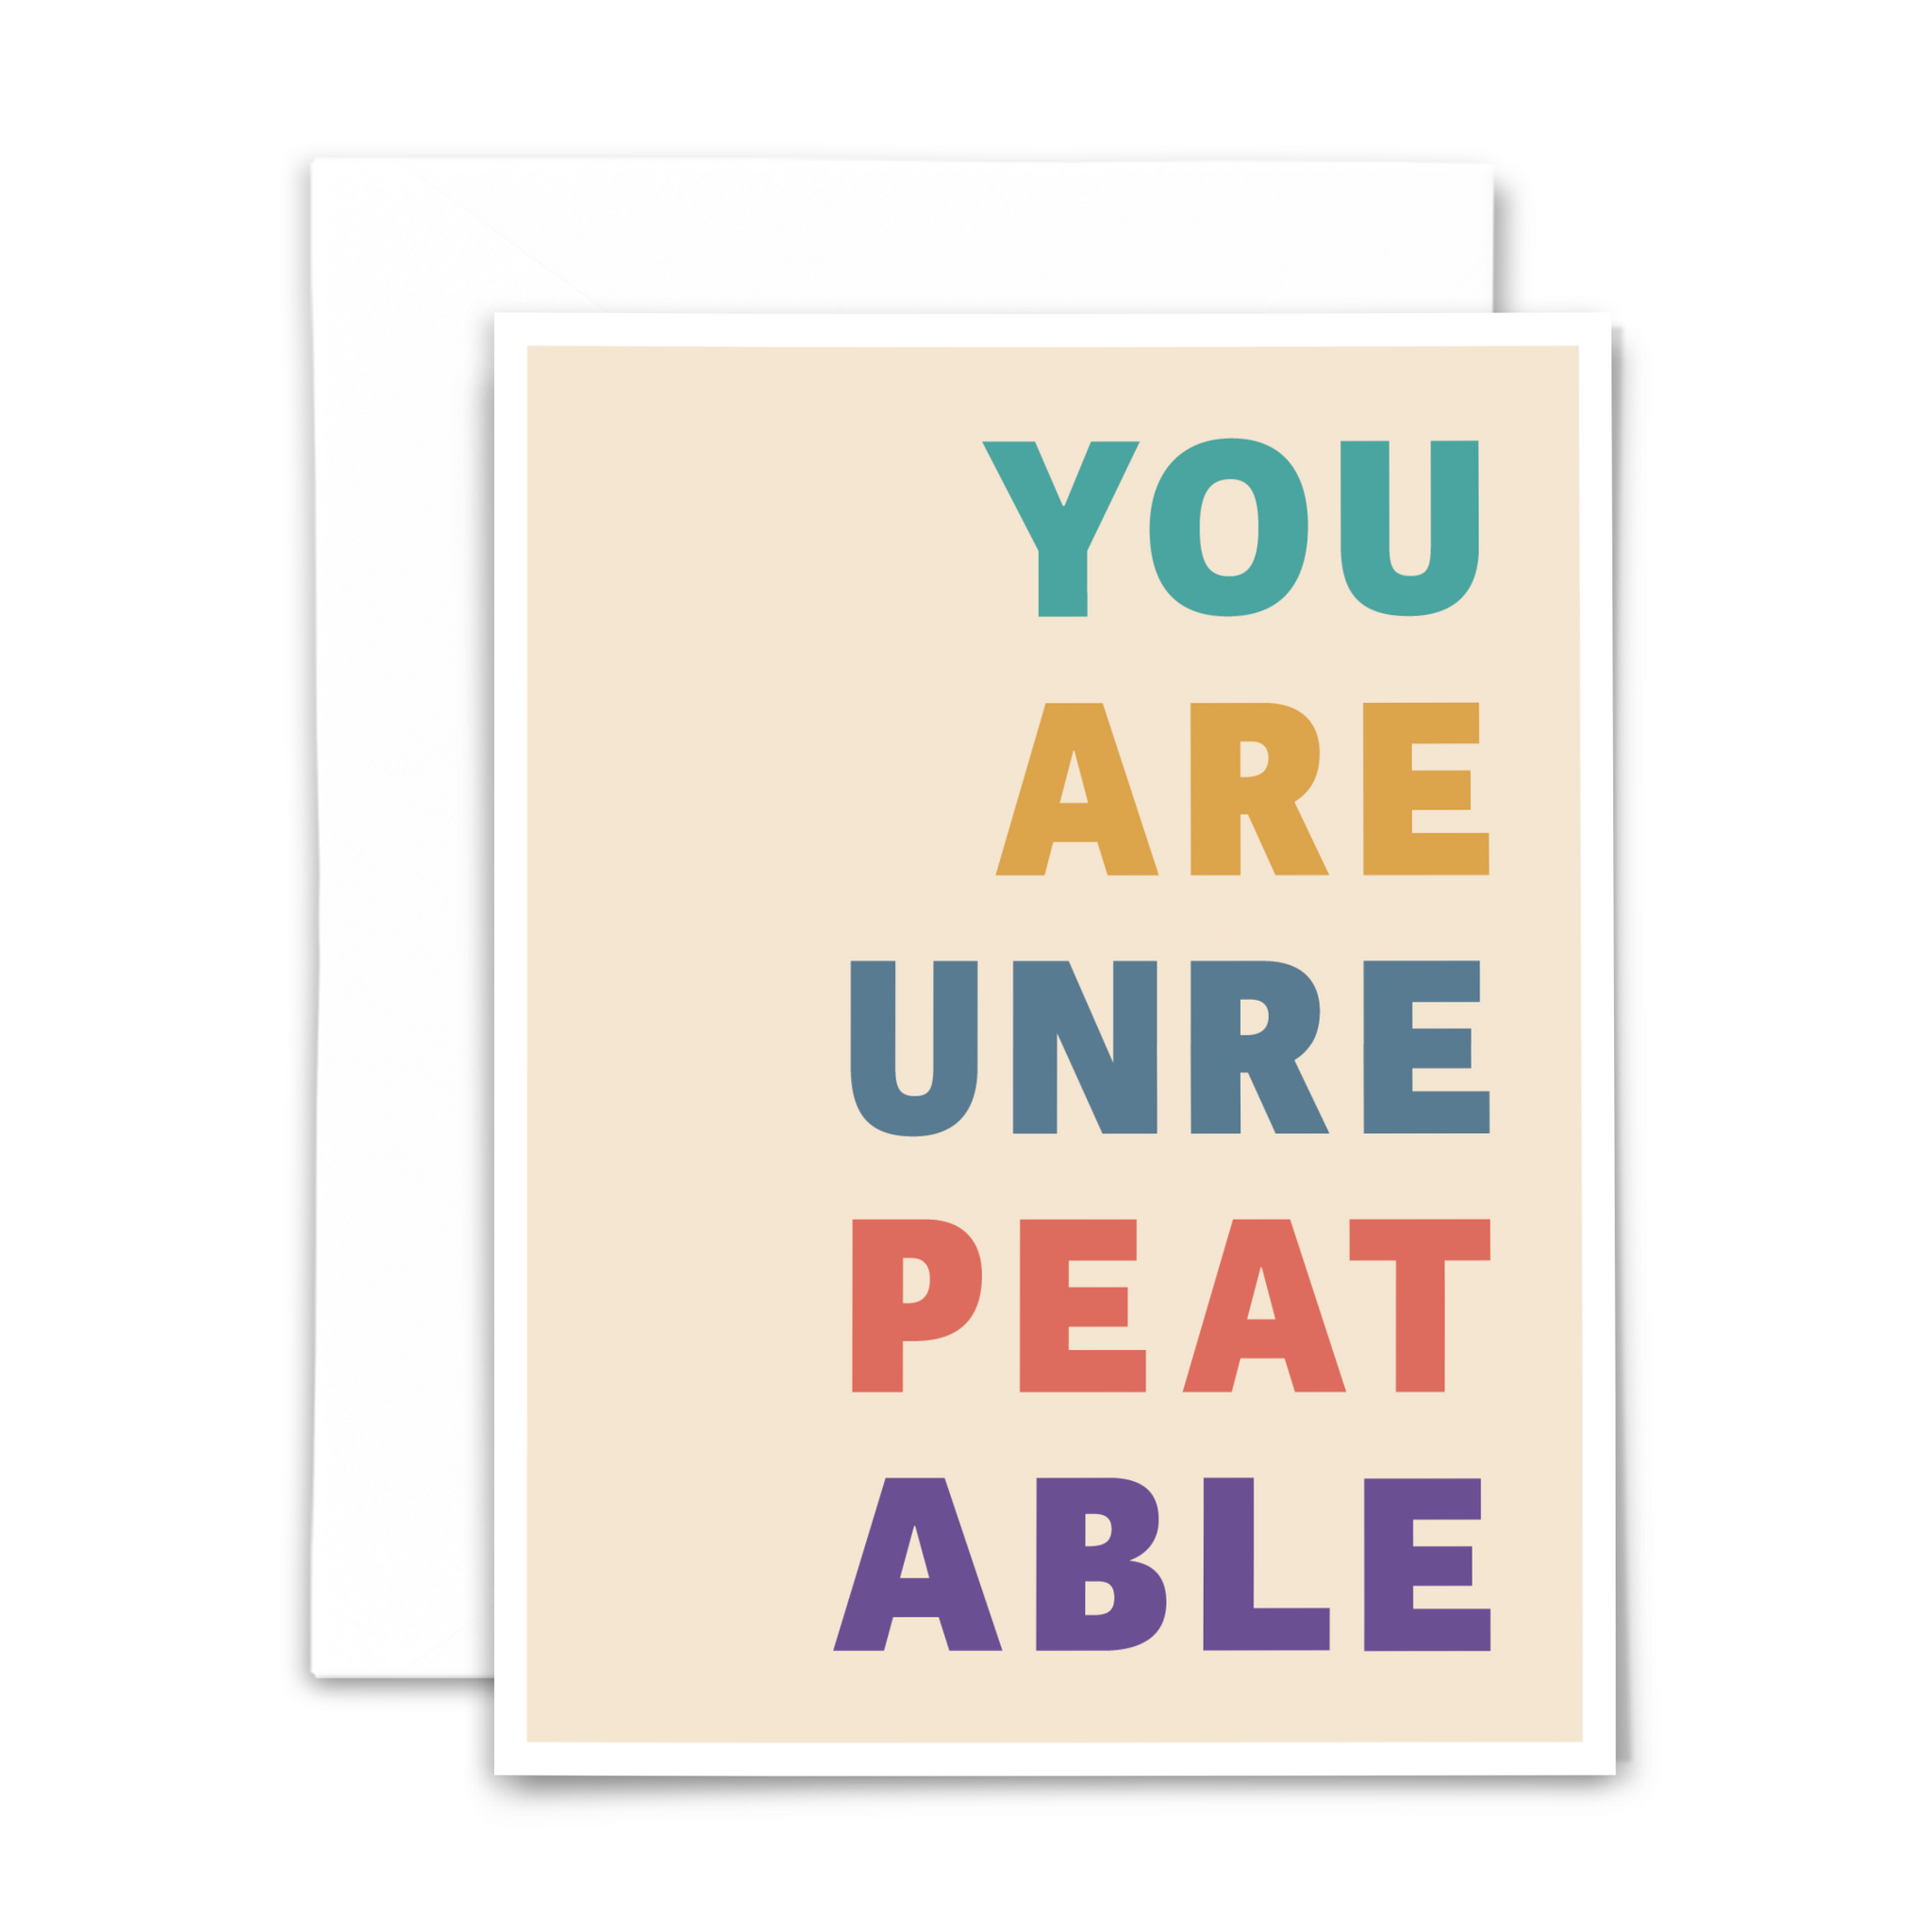 Folded greeting card with blank interior and white envelope; front reads "You are unrepeatable" in bright bold block letters on light yellow background with white border